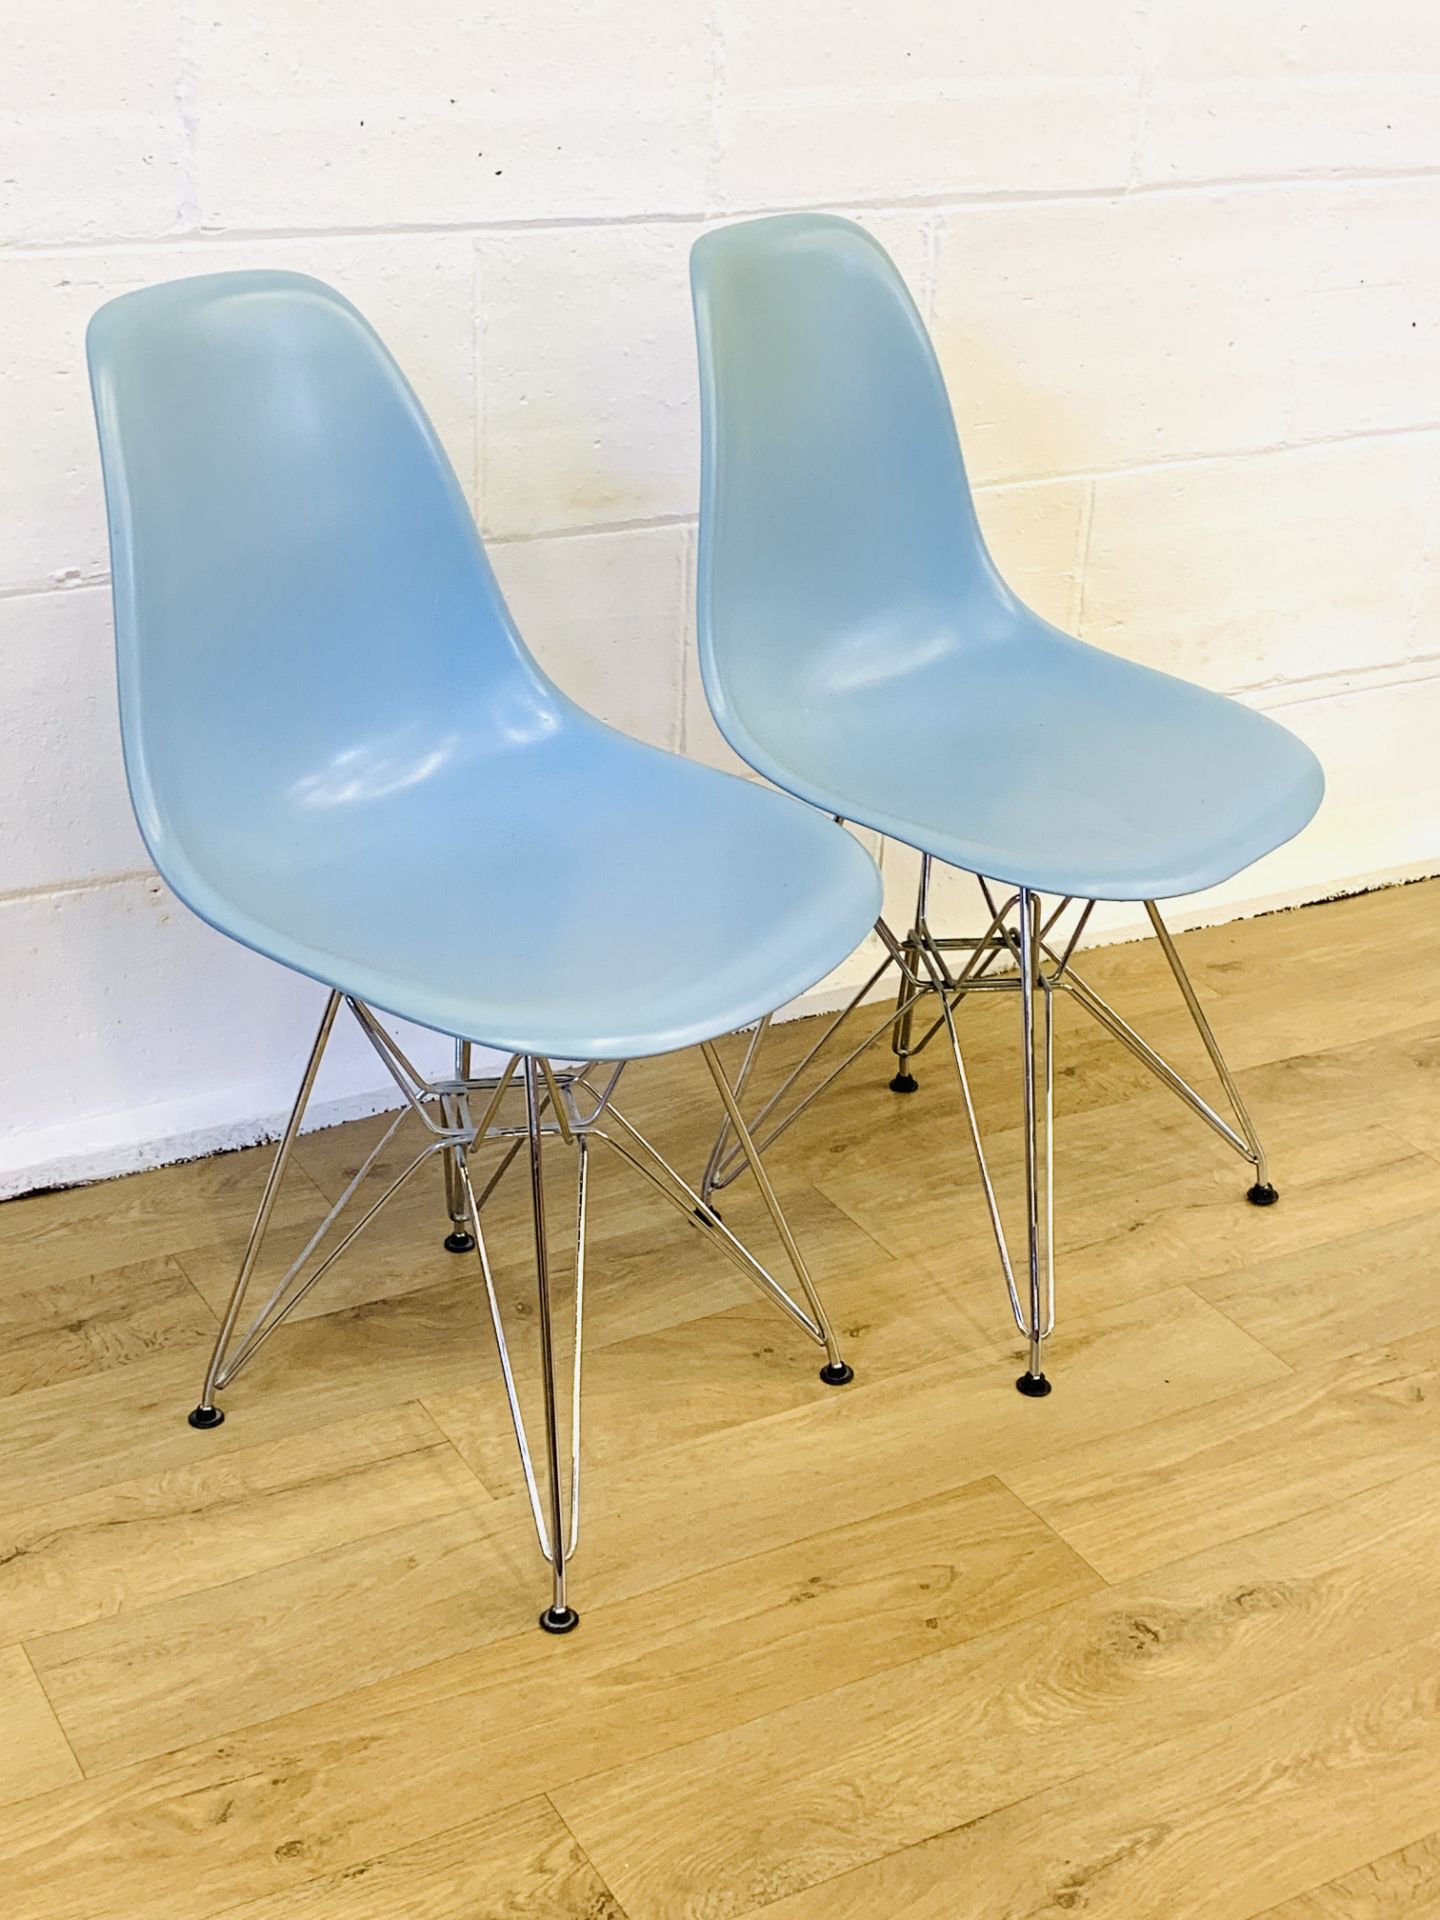 Two blue plastic chairs - Image 2 of 4